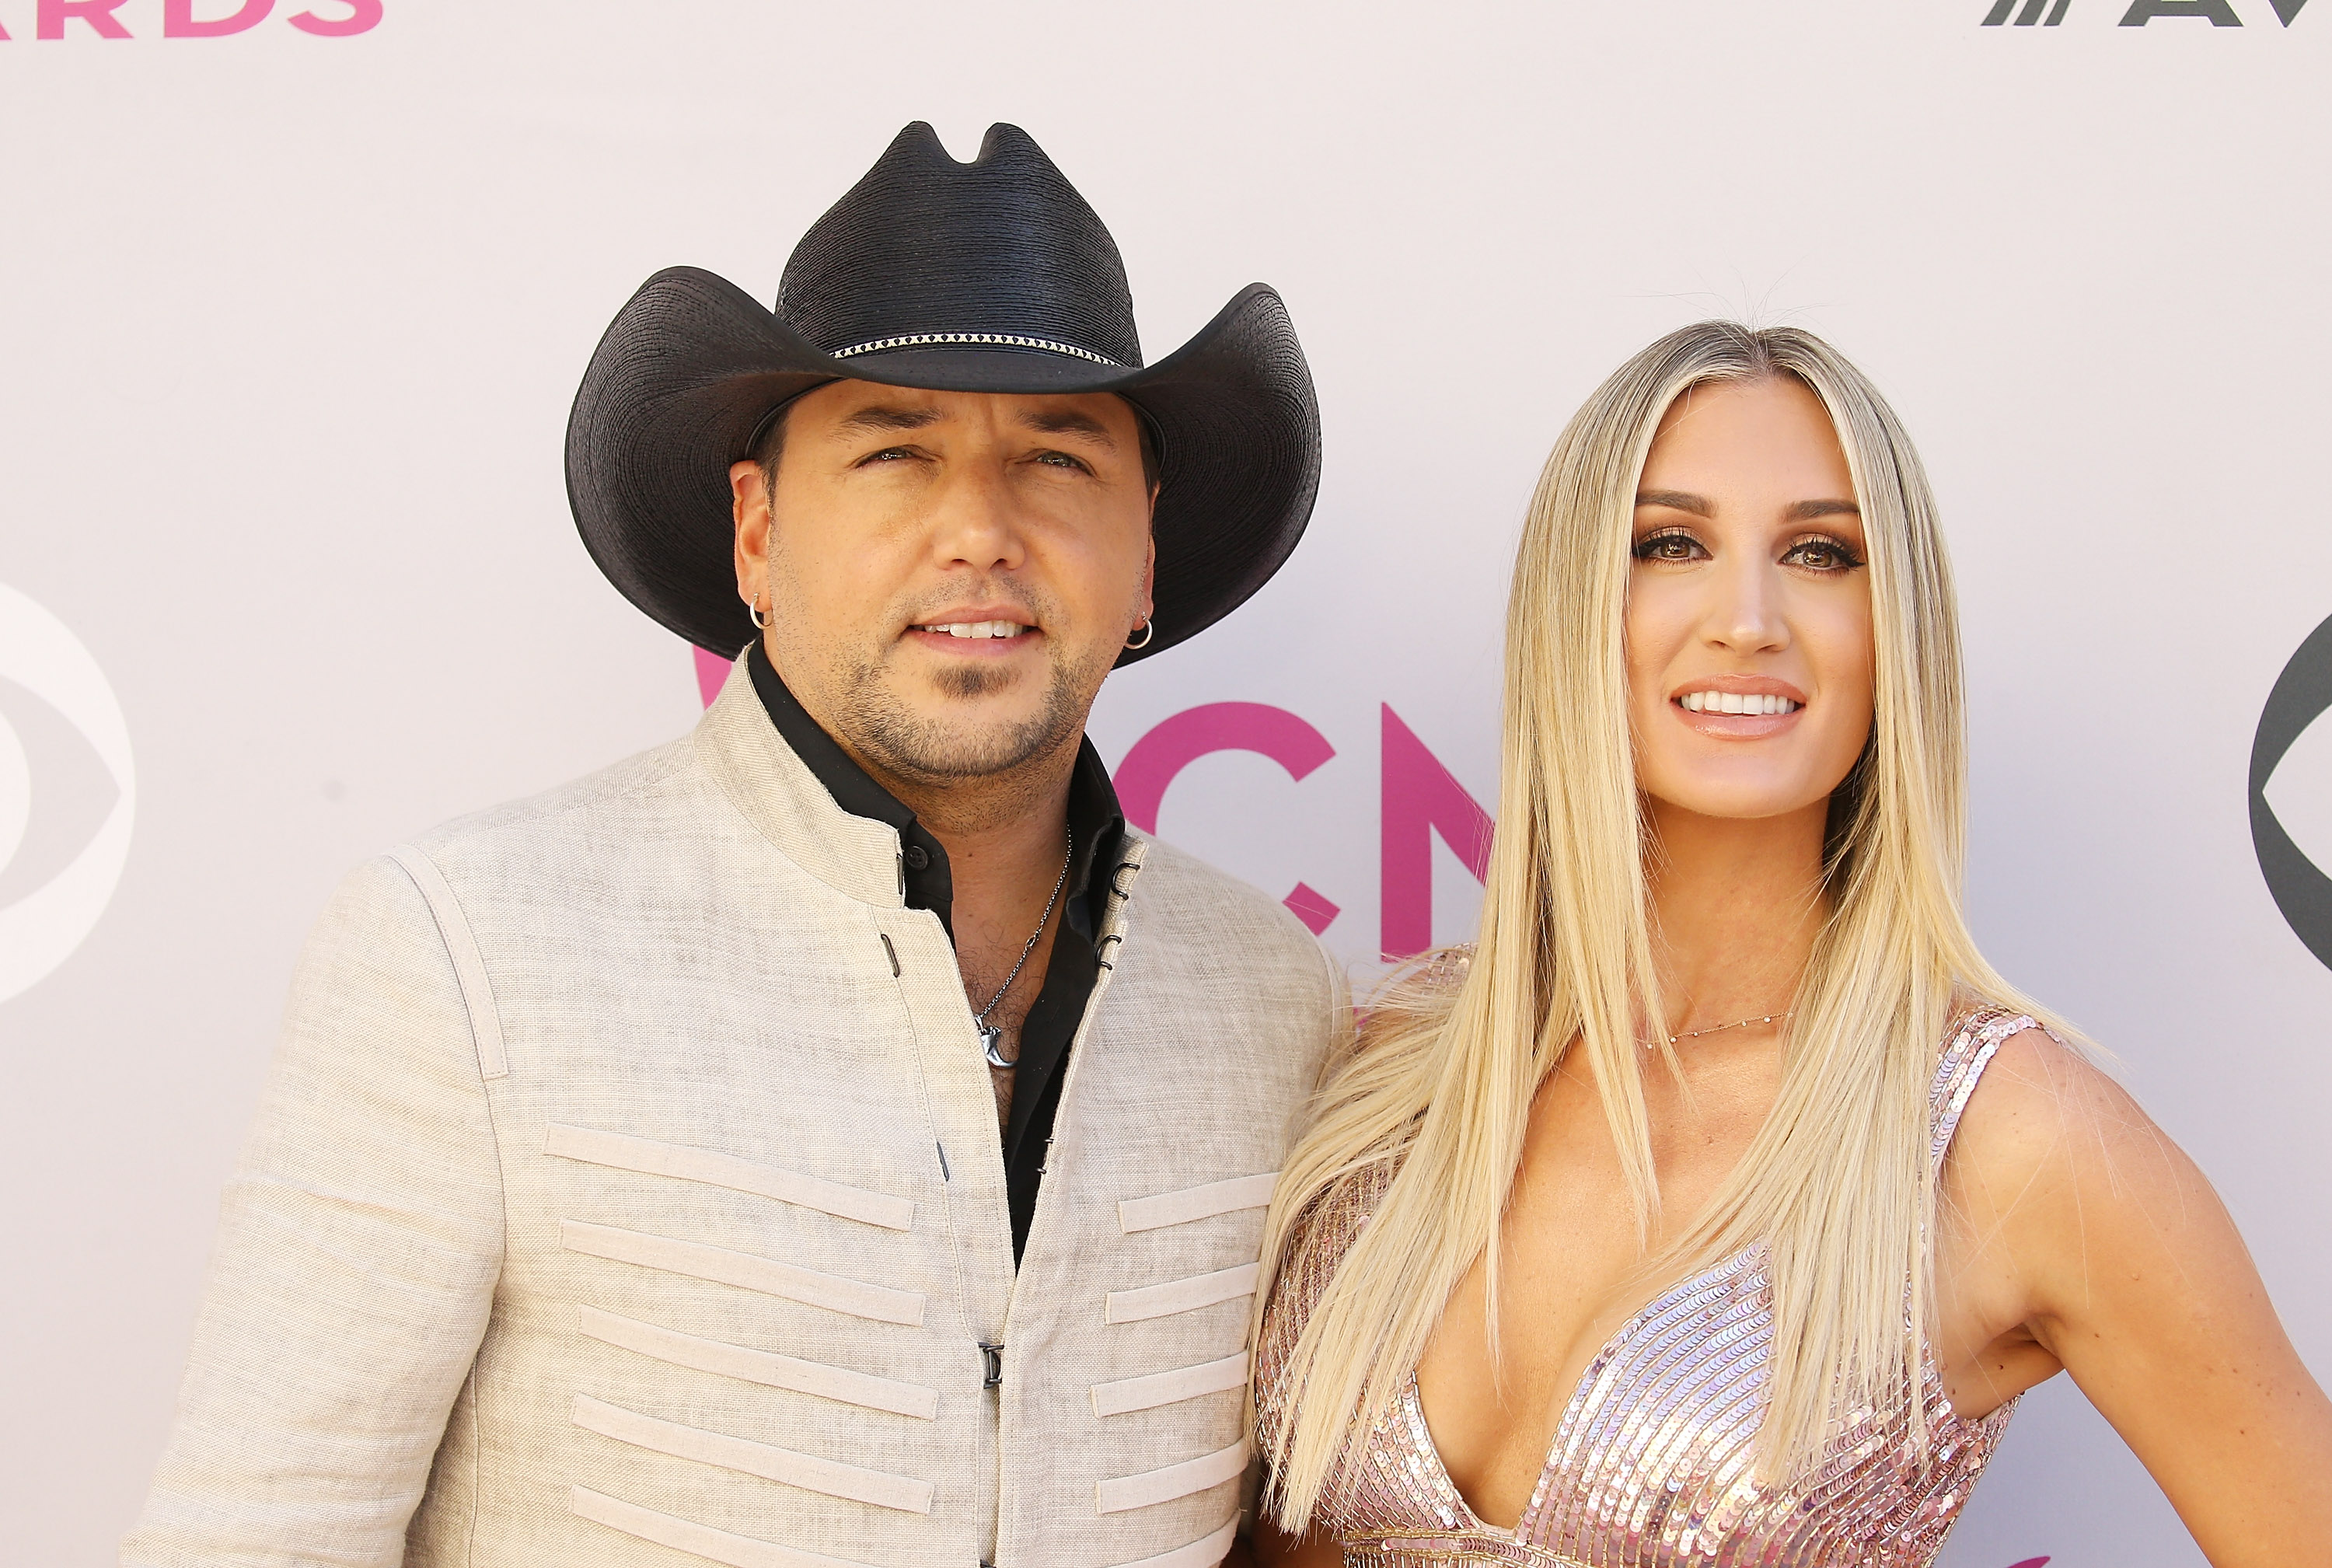 LAS VEGAS, NV - APRIL 02:  Brittany Kerr and Jason Aldean arrive at the 52nd Academy of Country Music Awards held at T-Mobile Arena on April 2, 2017 in Las Vegas, Nevada.  (Photo by Michael Tran/FilmMagic) (Michael Tran—FilmMagic)